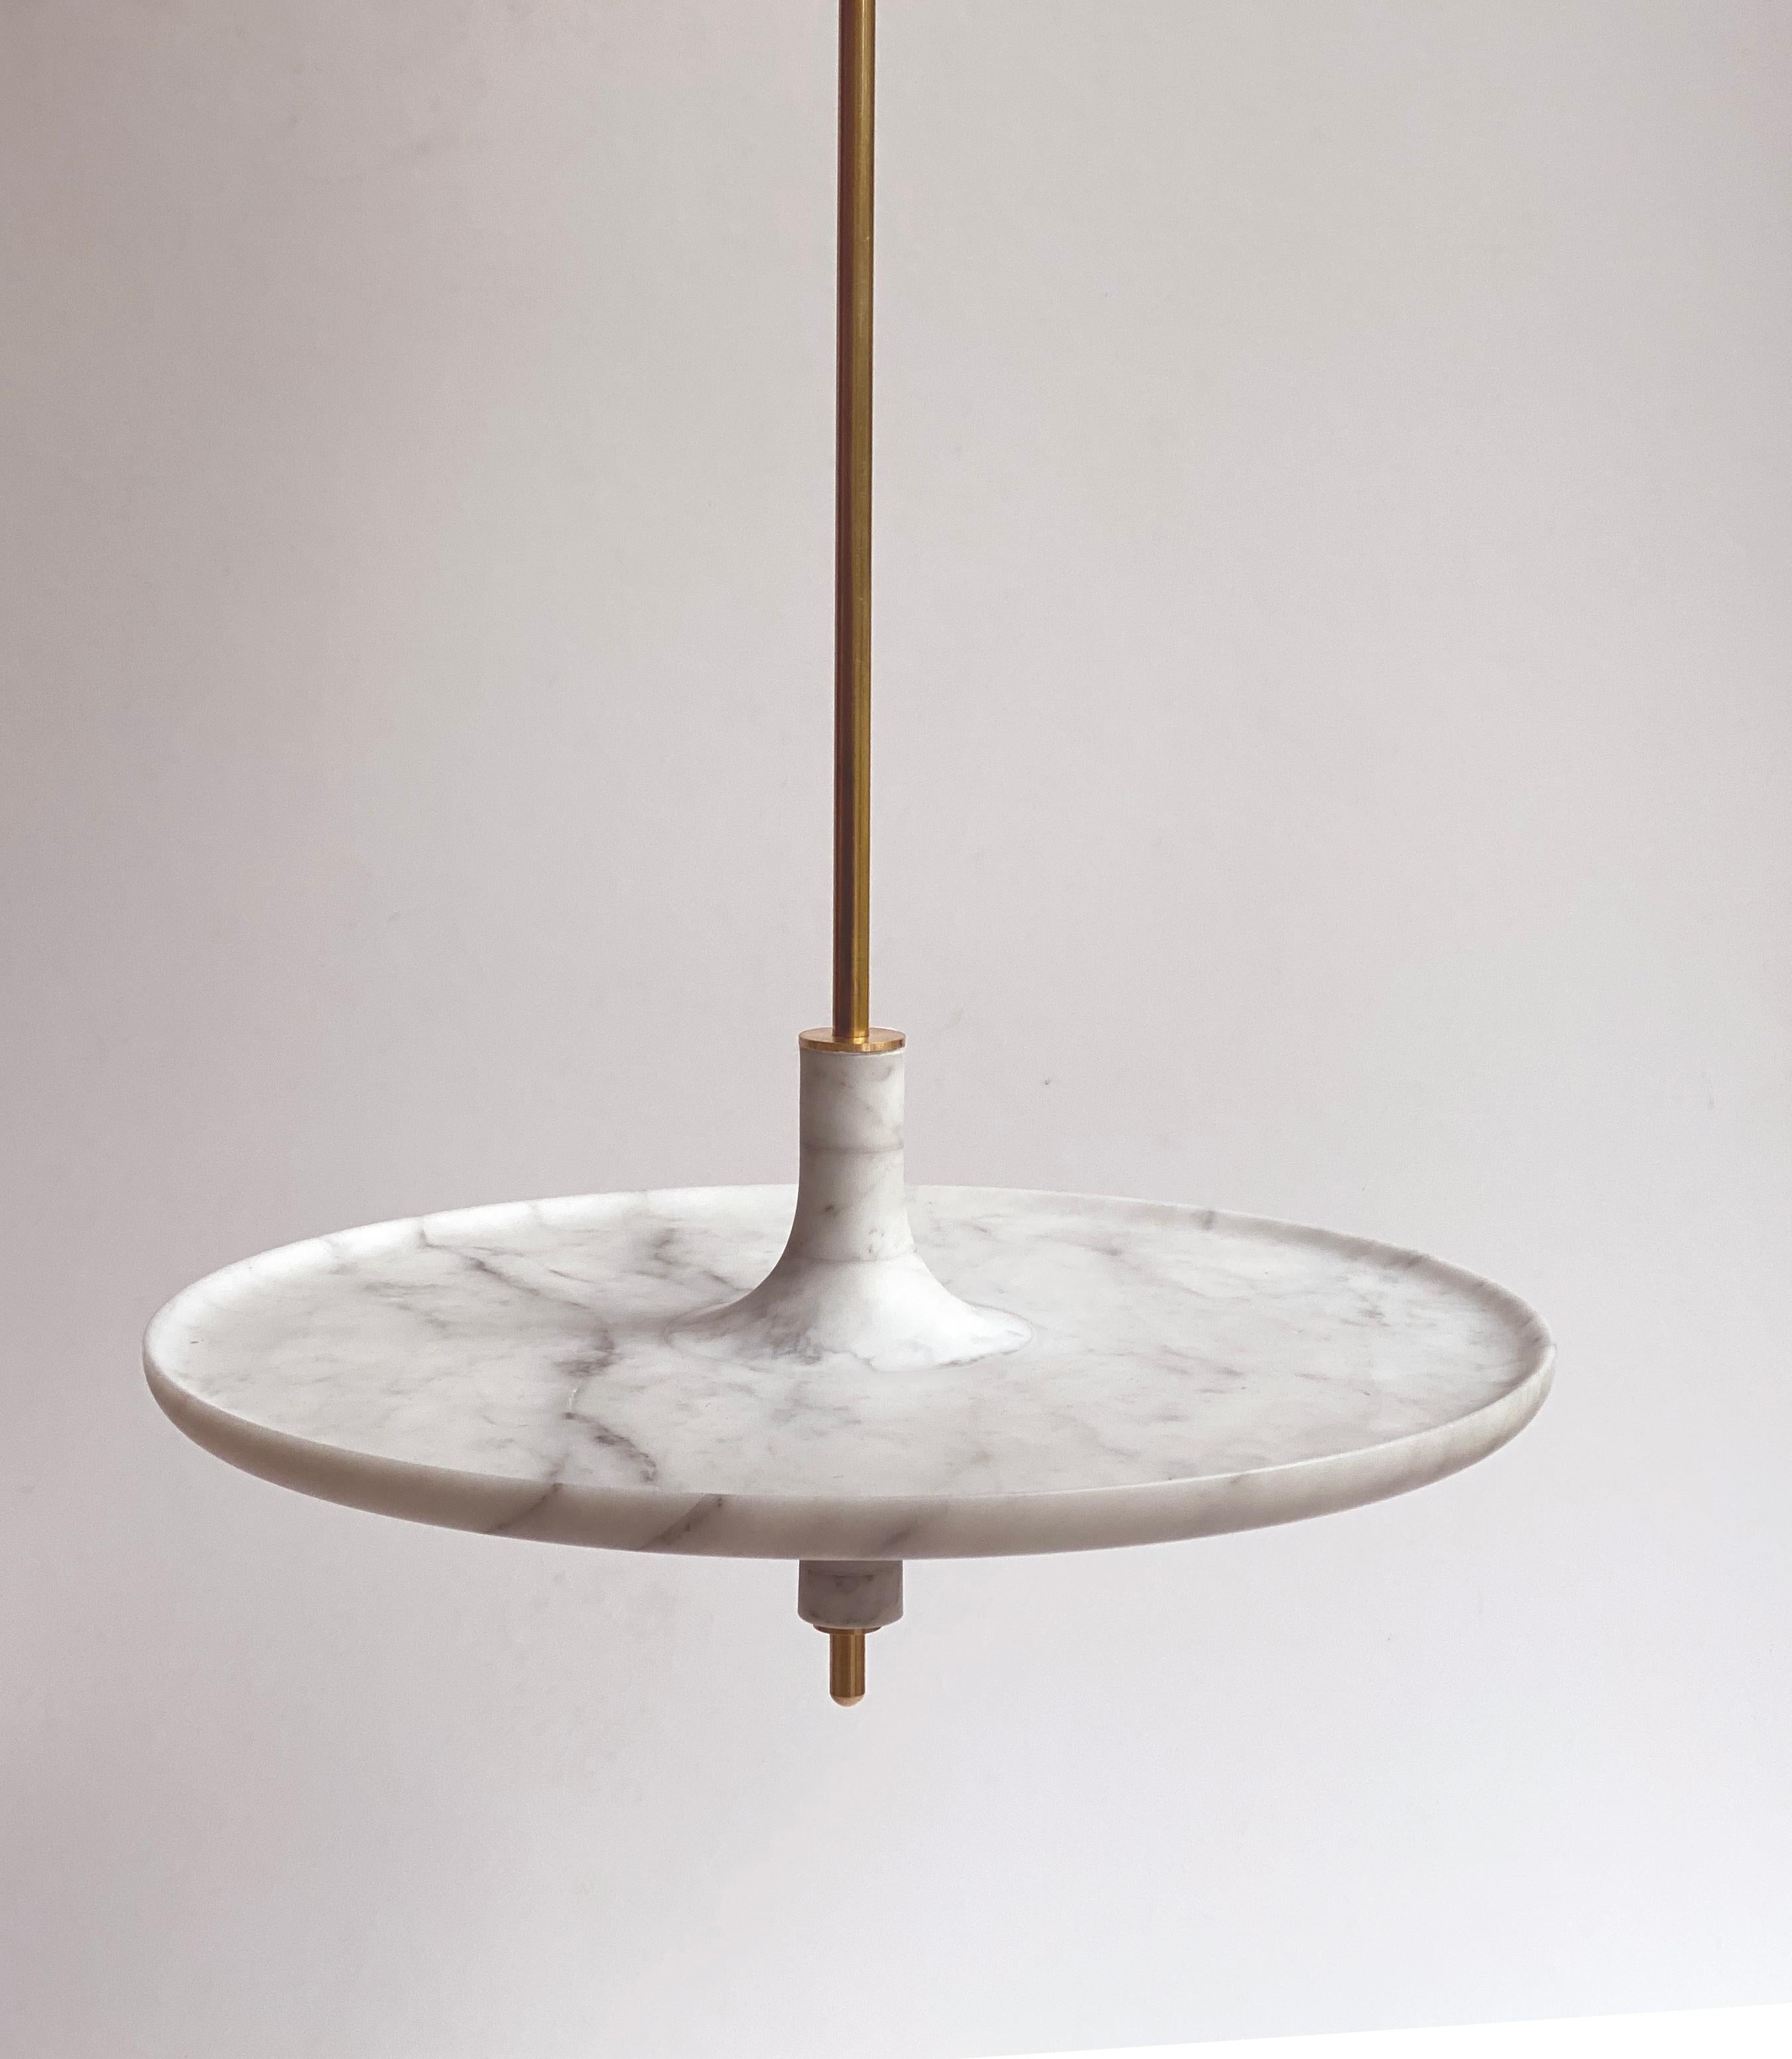 Toupy Carrara White Marble and Brass 38 Hanging Table by Mademoiselle Jo
Dimensions: Ø 38 x H 150 cm.
Materials: Carrara white marble and brass.

Available in four wood colors, three marble options, two bar versions and several diameters. Please